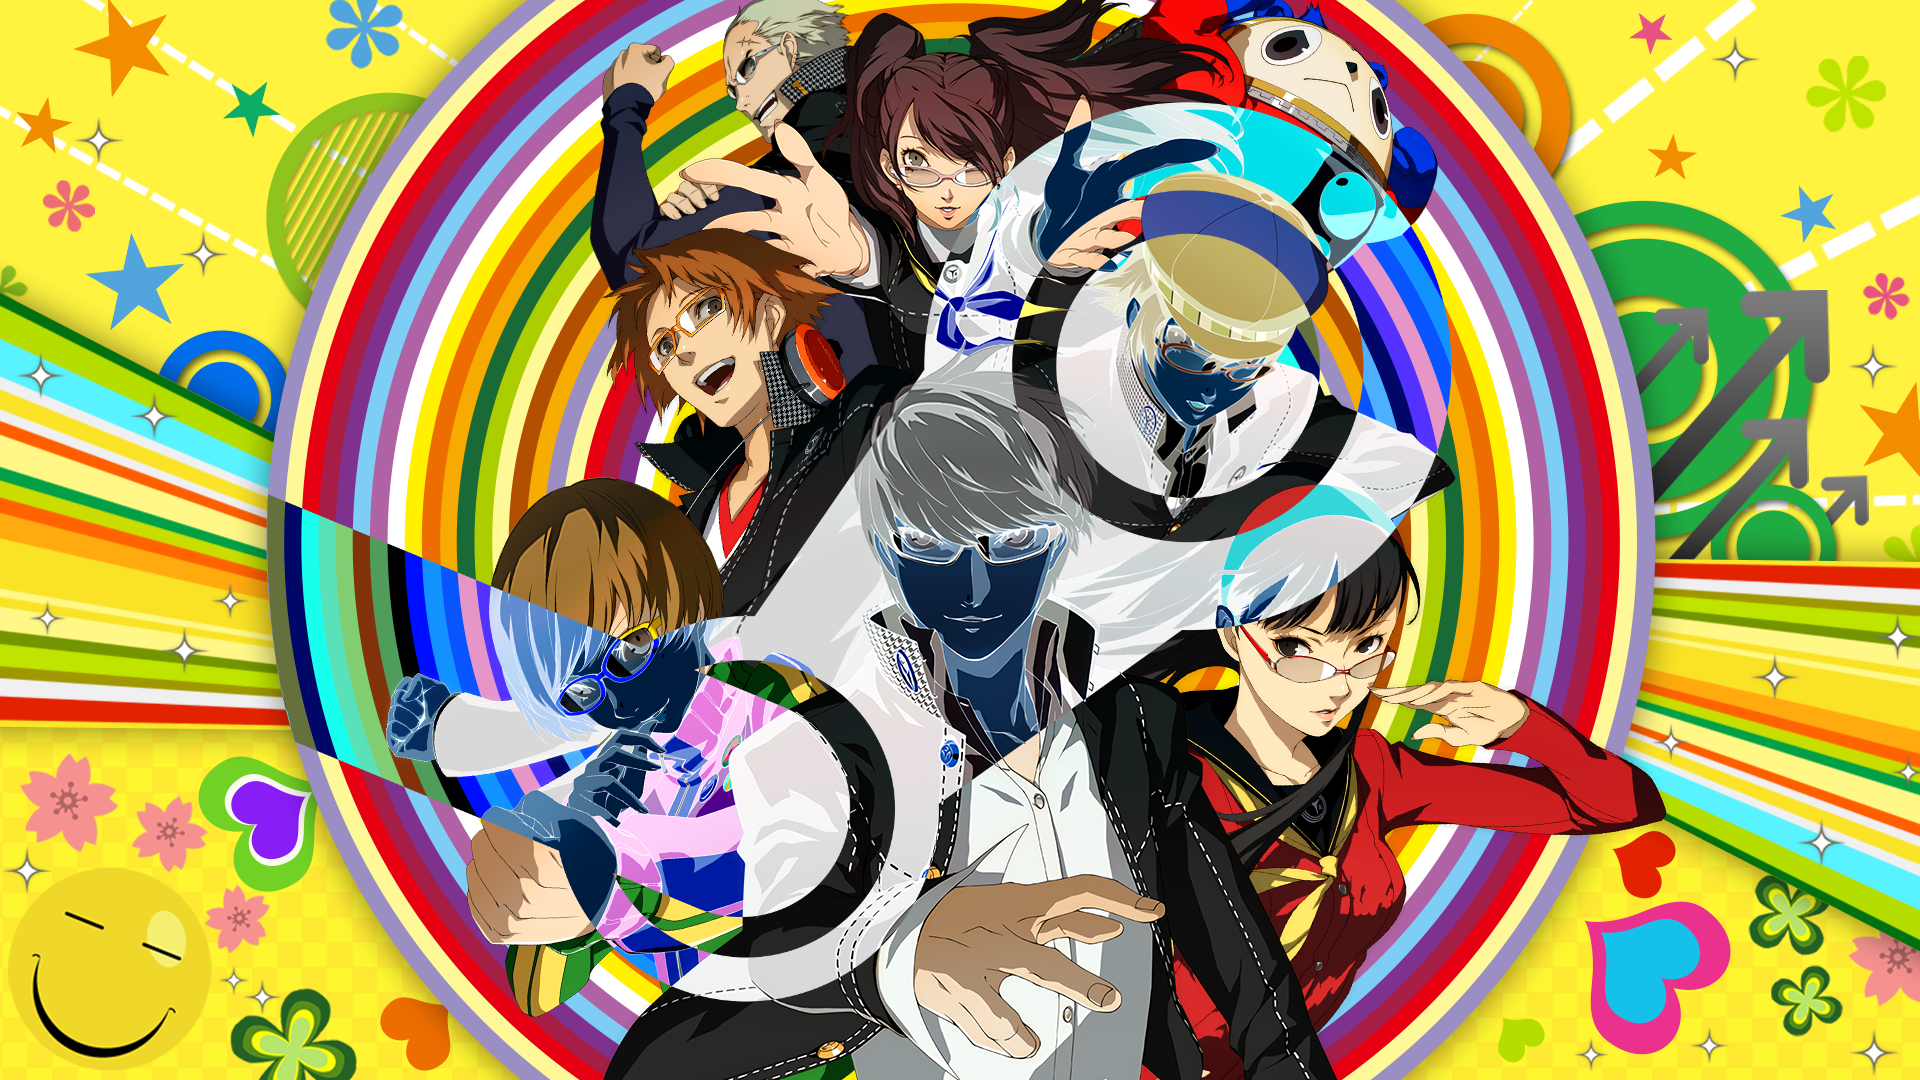 Persona 4 Golden is coming to Steam this week